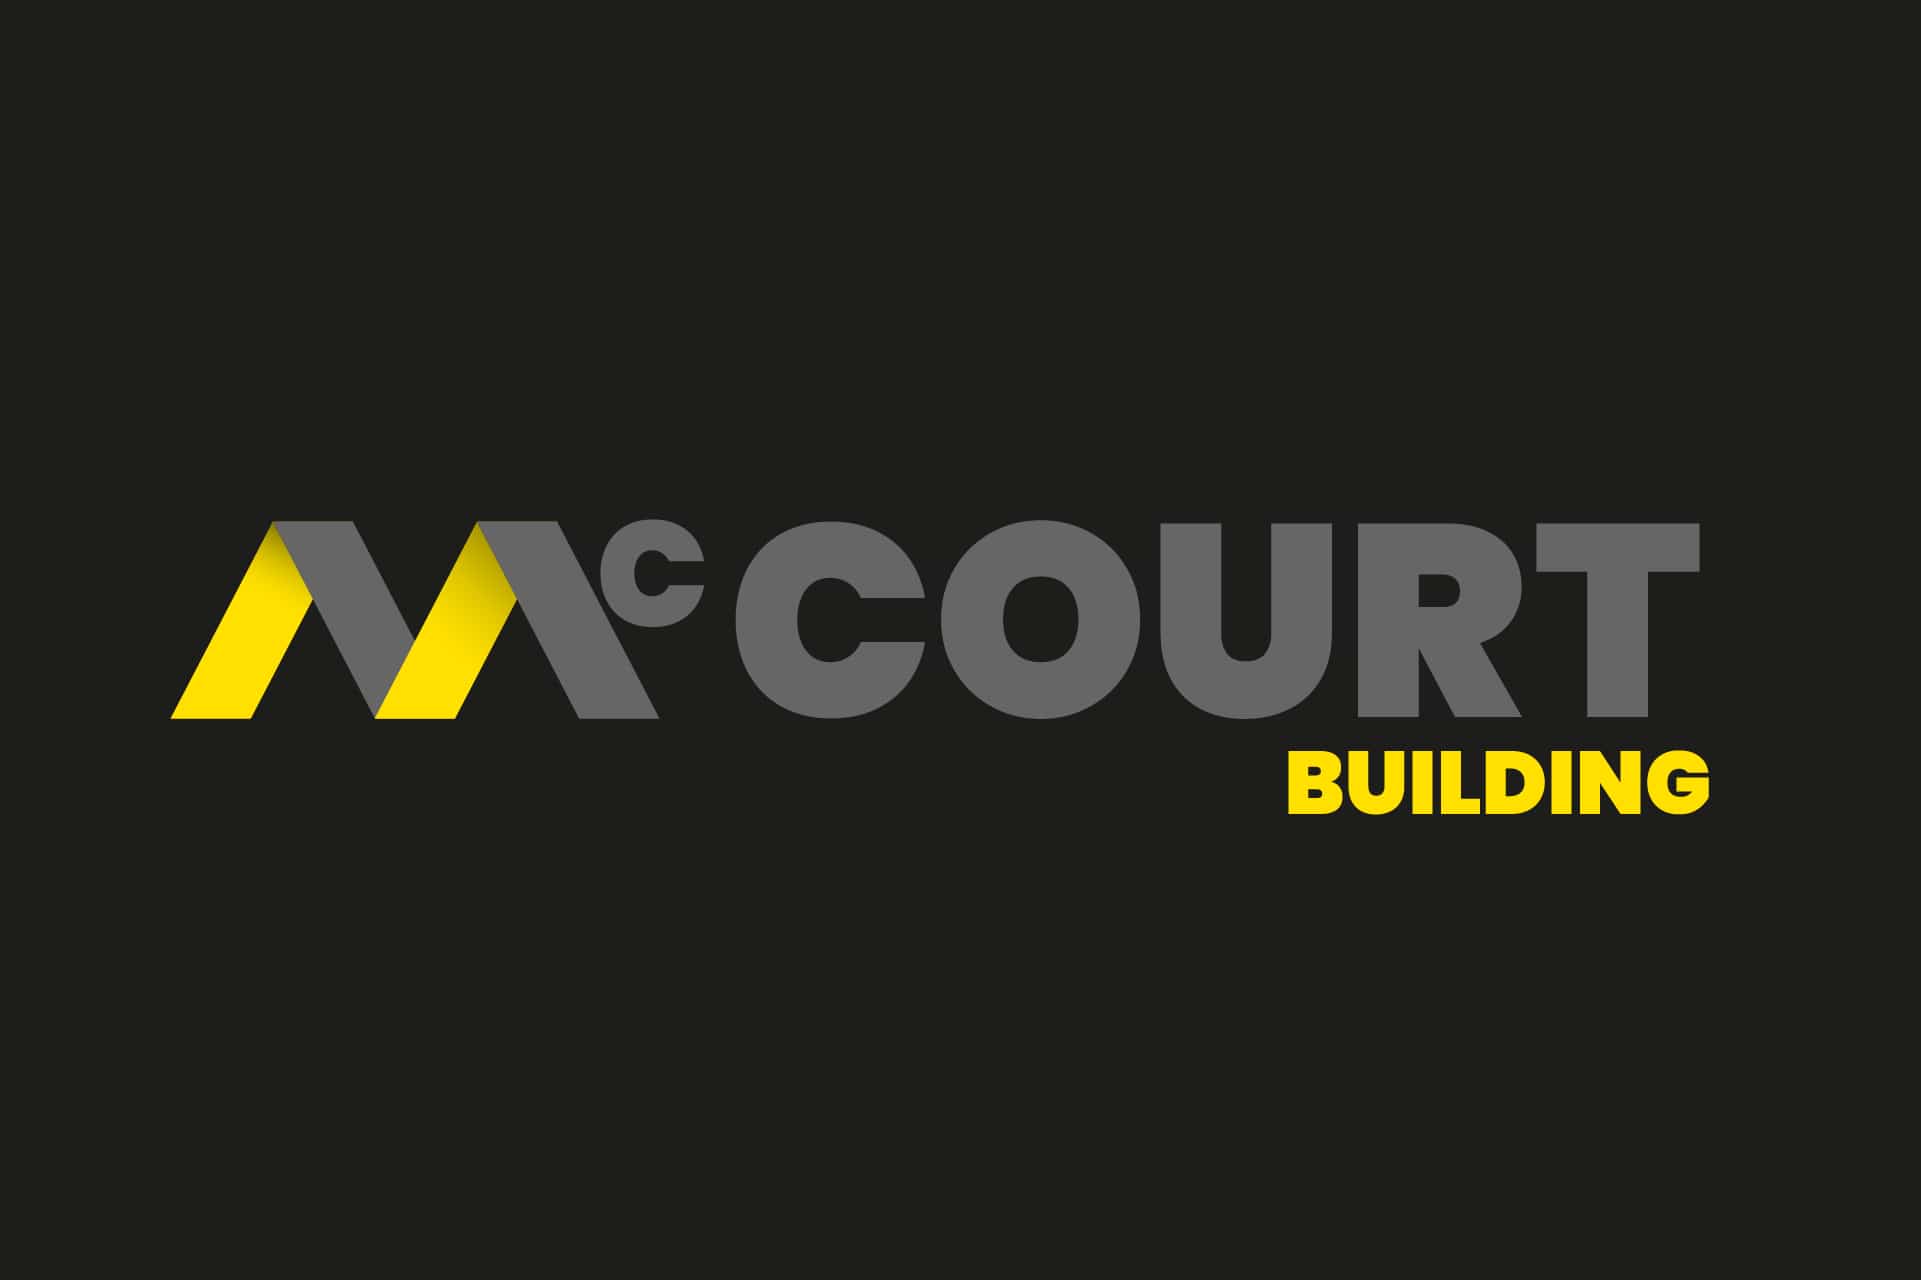 Using Negative Space to display the Roofs Creating the M in McCourts details for McCourt Building Designed by Darragh McNulty - Wowwee Design - Sydney Design Agency - Graphic Design - Marketing